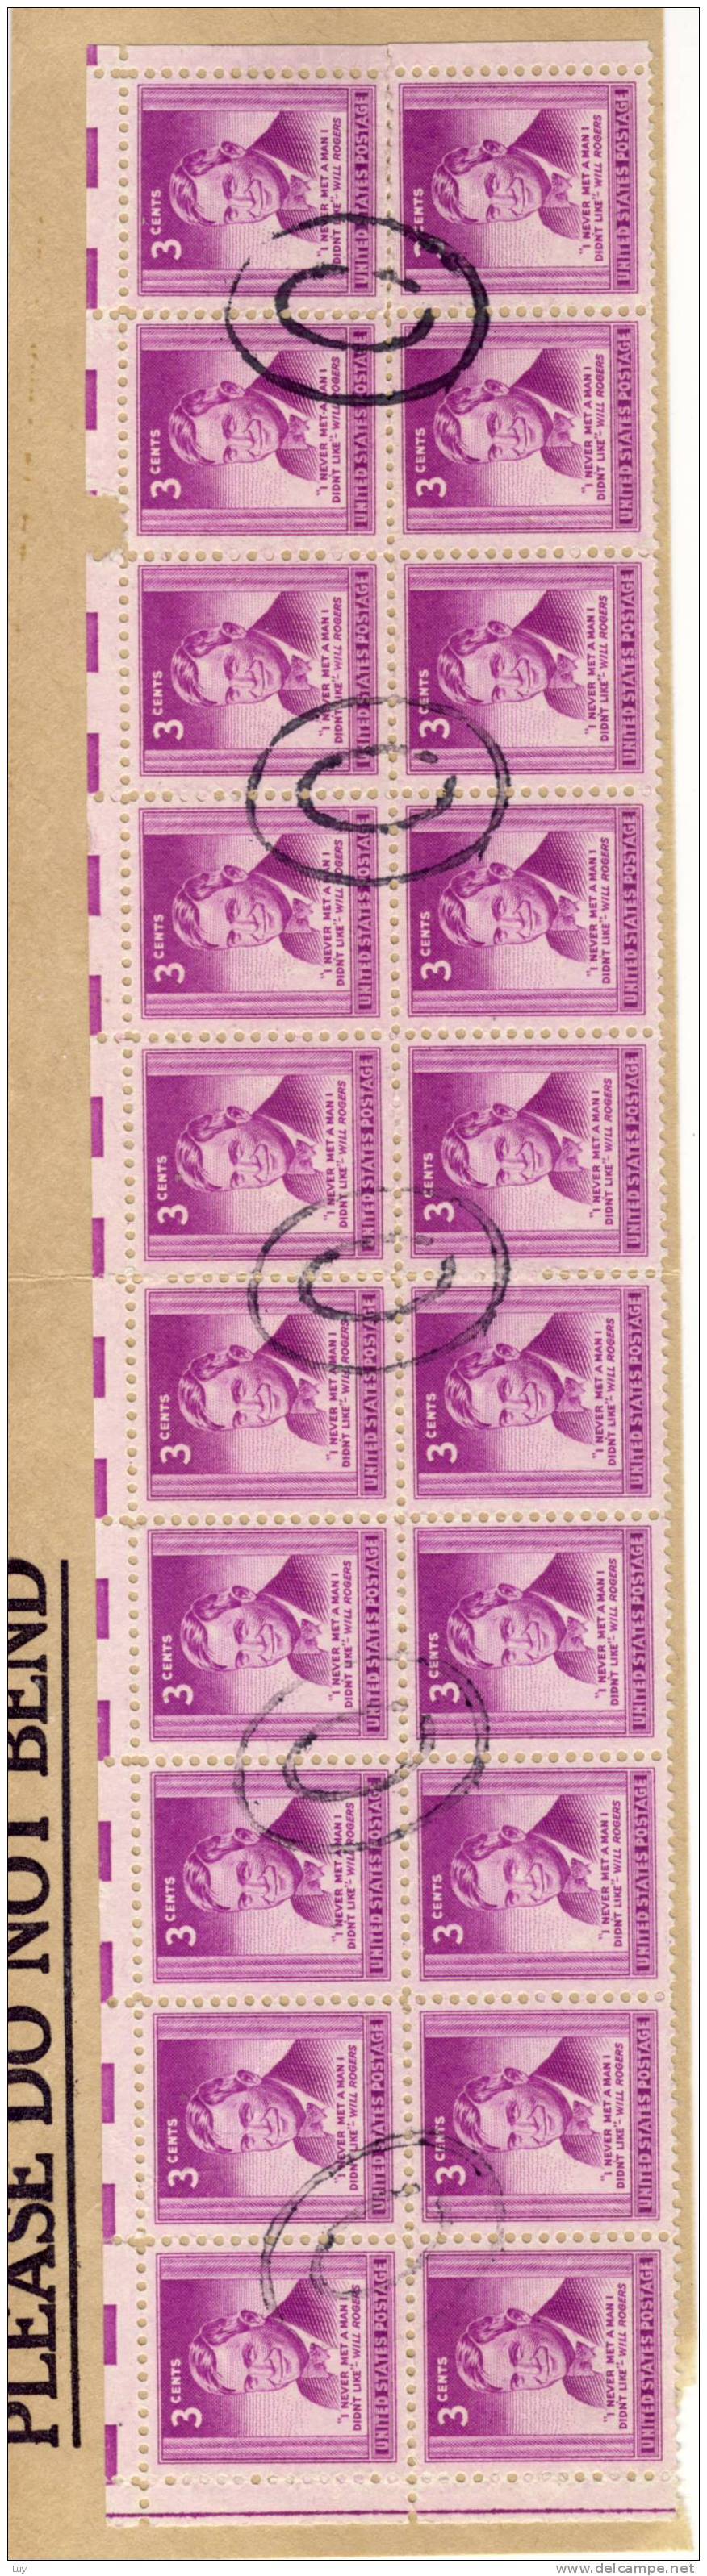 United States -scott N° 975 - Will Rogers - Used Stamp On Piece - Stripe Of 20 - Multiples & Strips